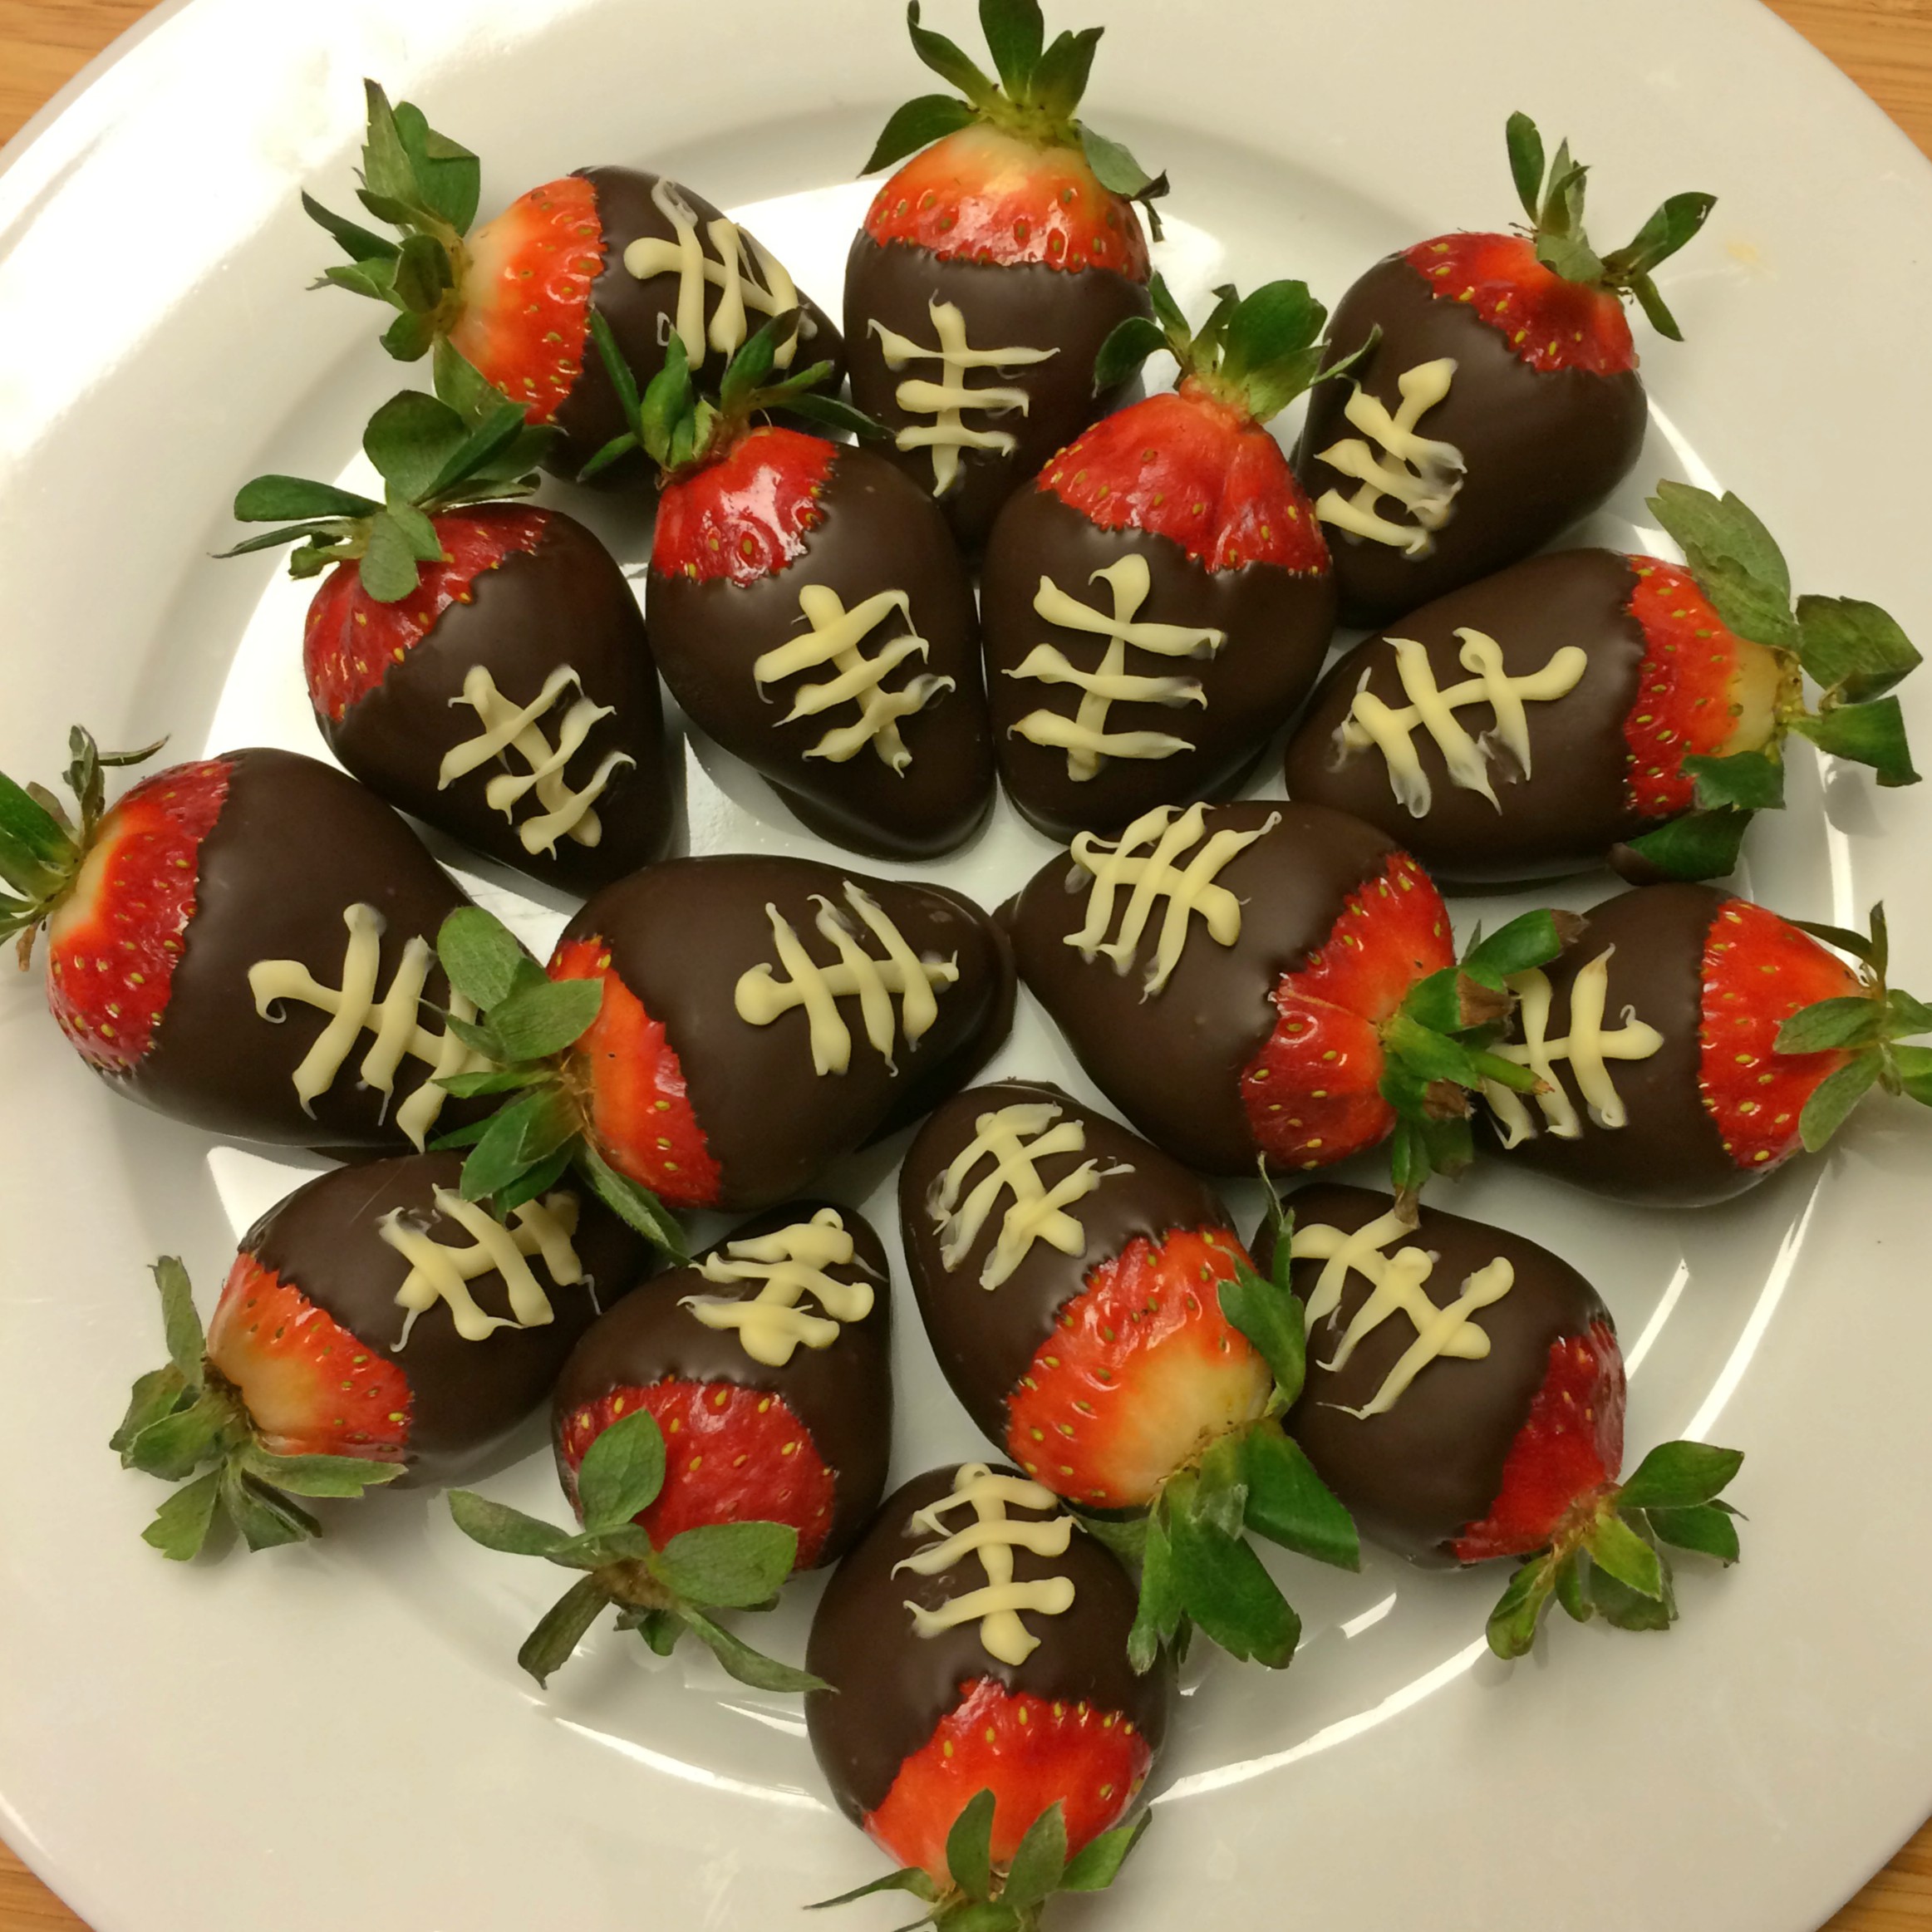 Chocolate Dipped Strawberries - Super Healthy Kids